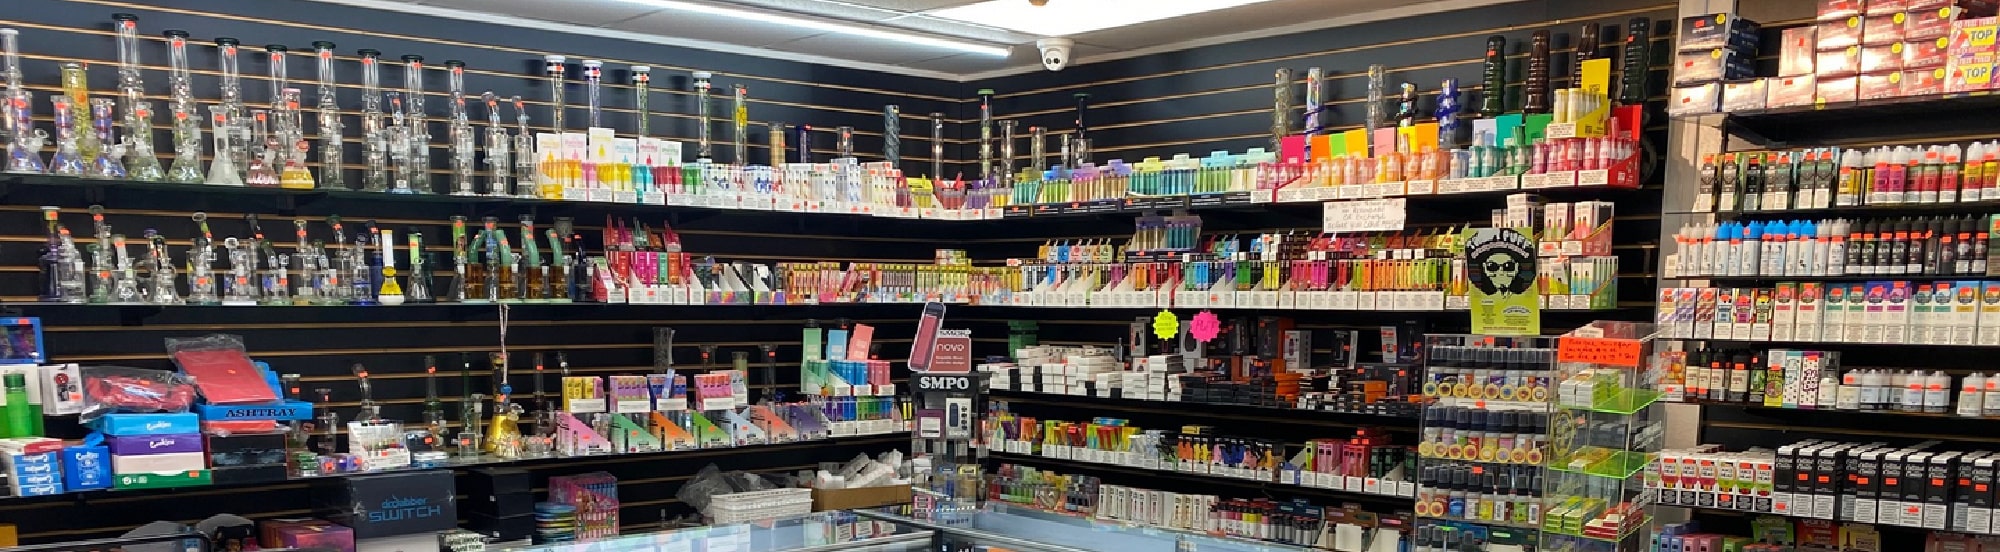 image of stardust vapes in champaign il